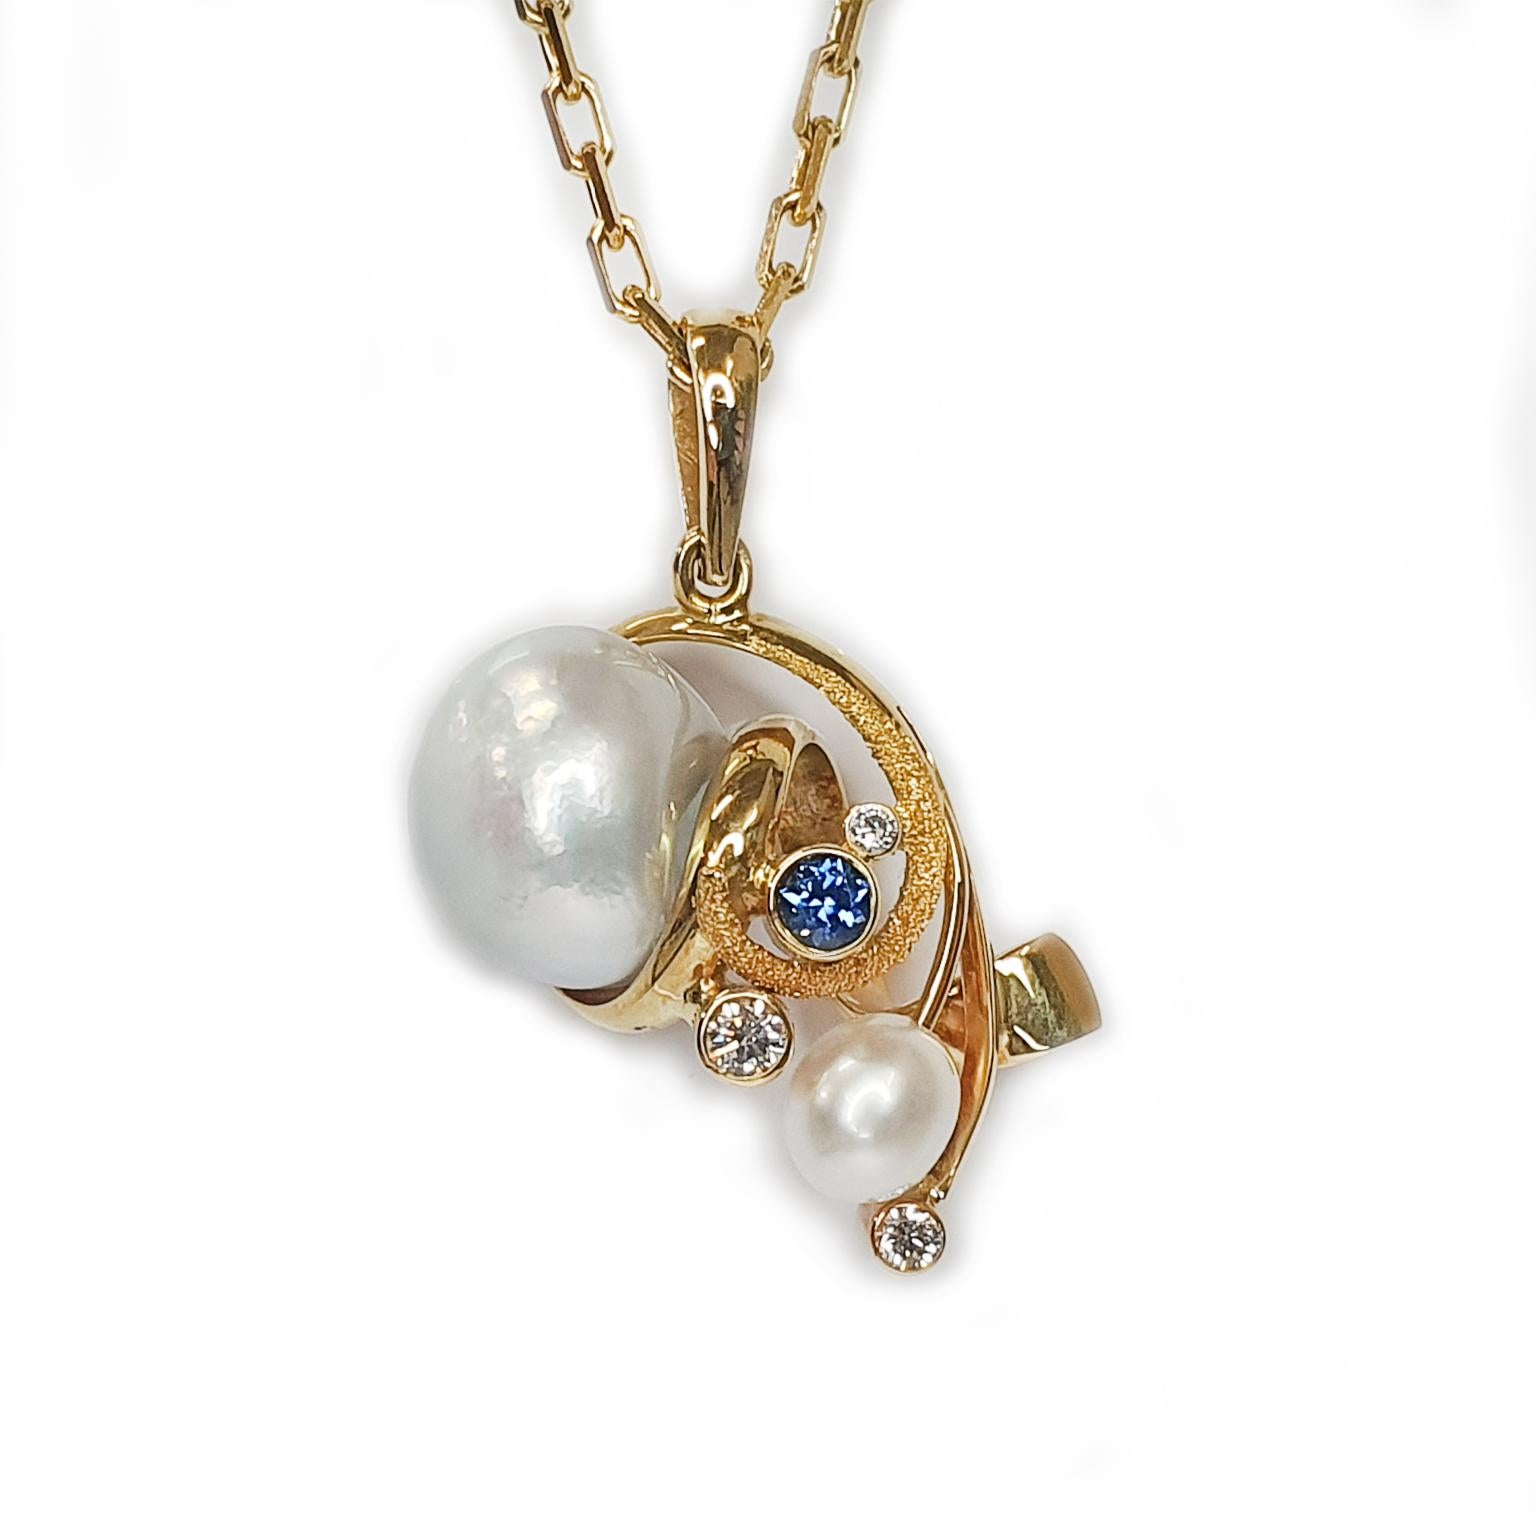 Paul Amey’s Broome keshi pearl and blue sapphire pendant was crafted from 18K yellow gold. The pearls are from Broome, Western Australia and are 12mm and 5.5mm. The pendant features a natural 3.5mm blue sapphire and also contains three E/F VS SI1